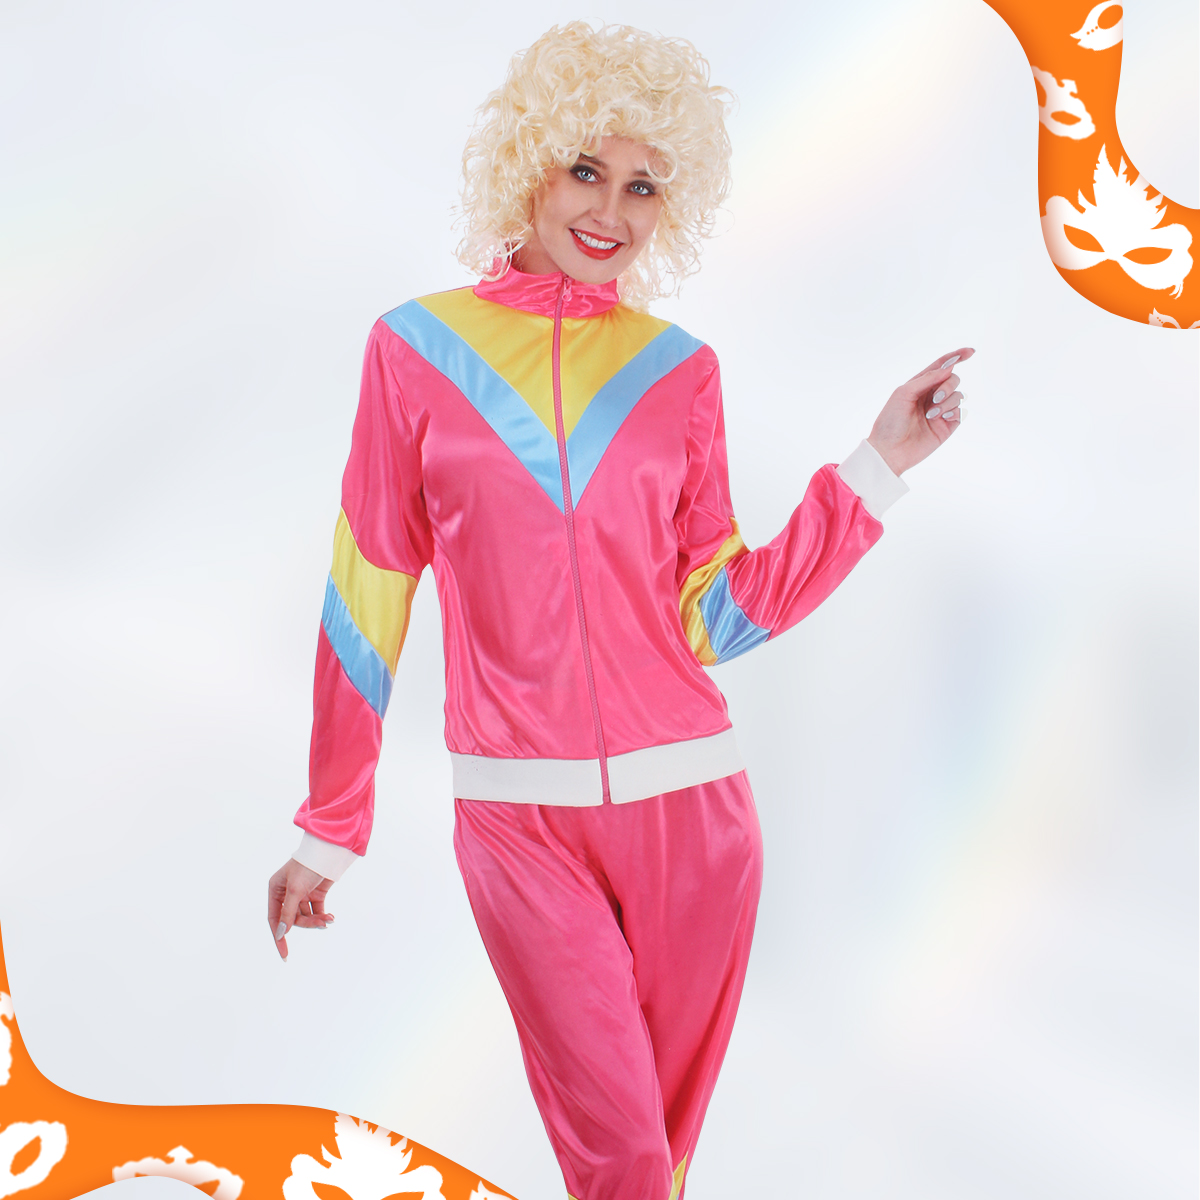 Couple Girls Vintage Style Suits Disco Girls Carnival Hip-hop Costume